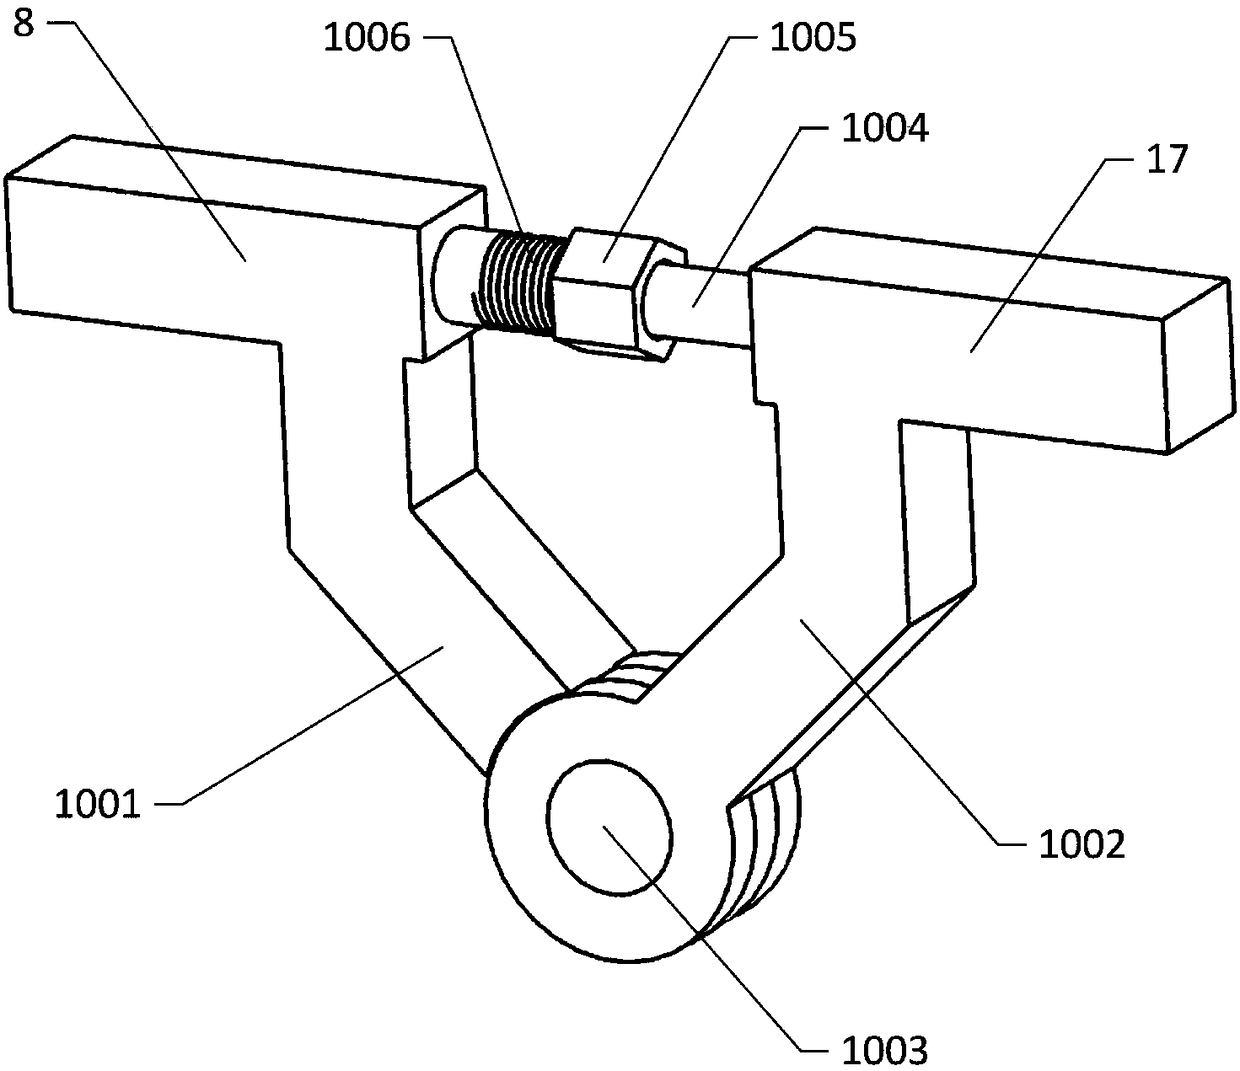 Longitudinal-bending duct-structured aerial robot for clearing tree obstacles